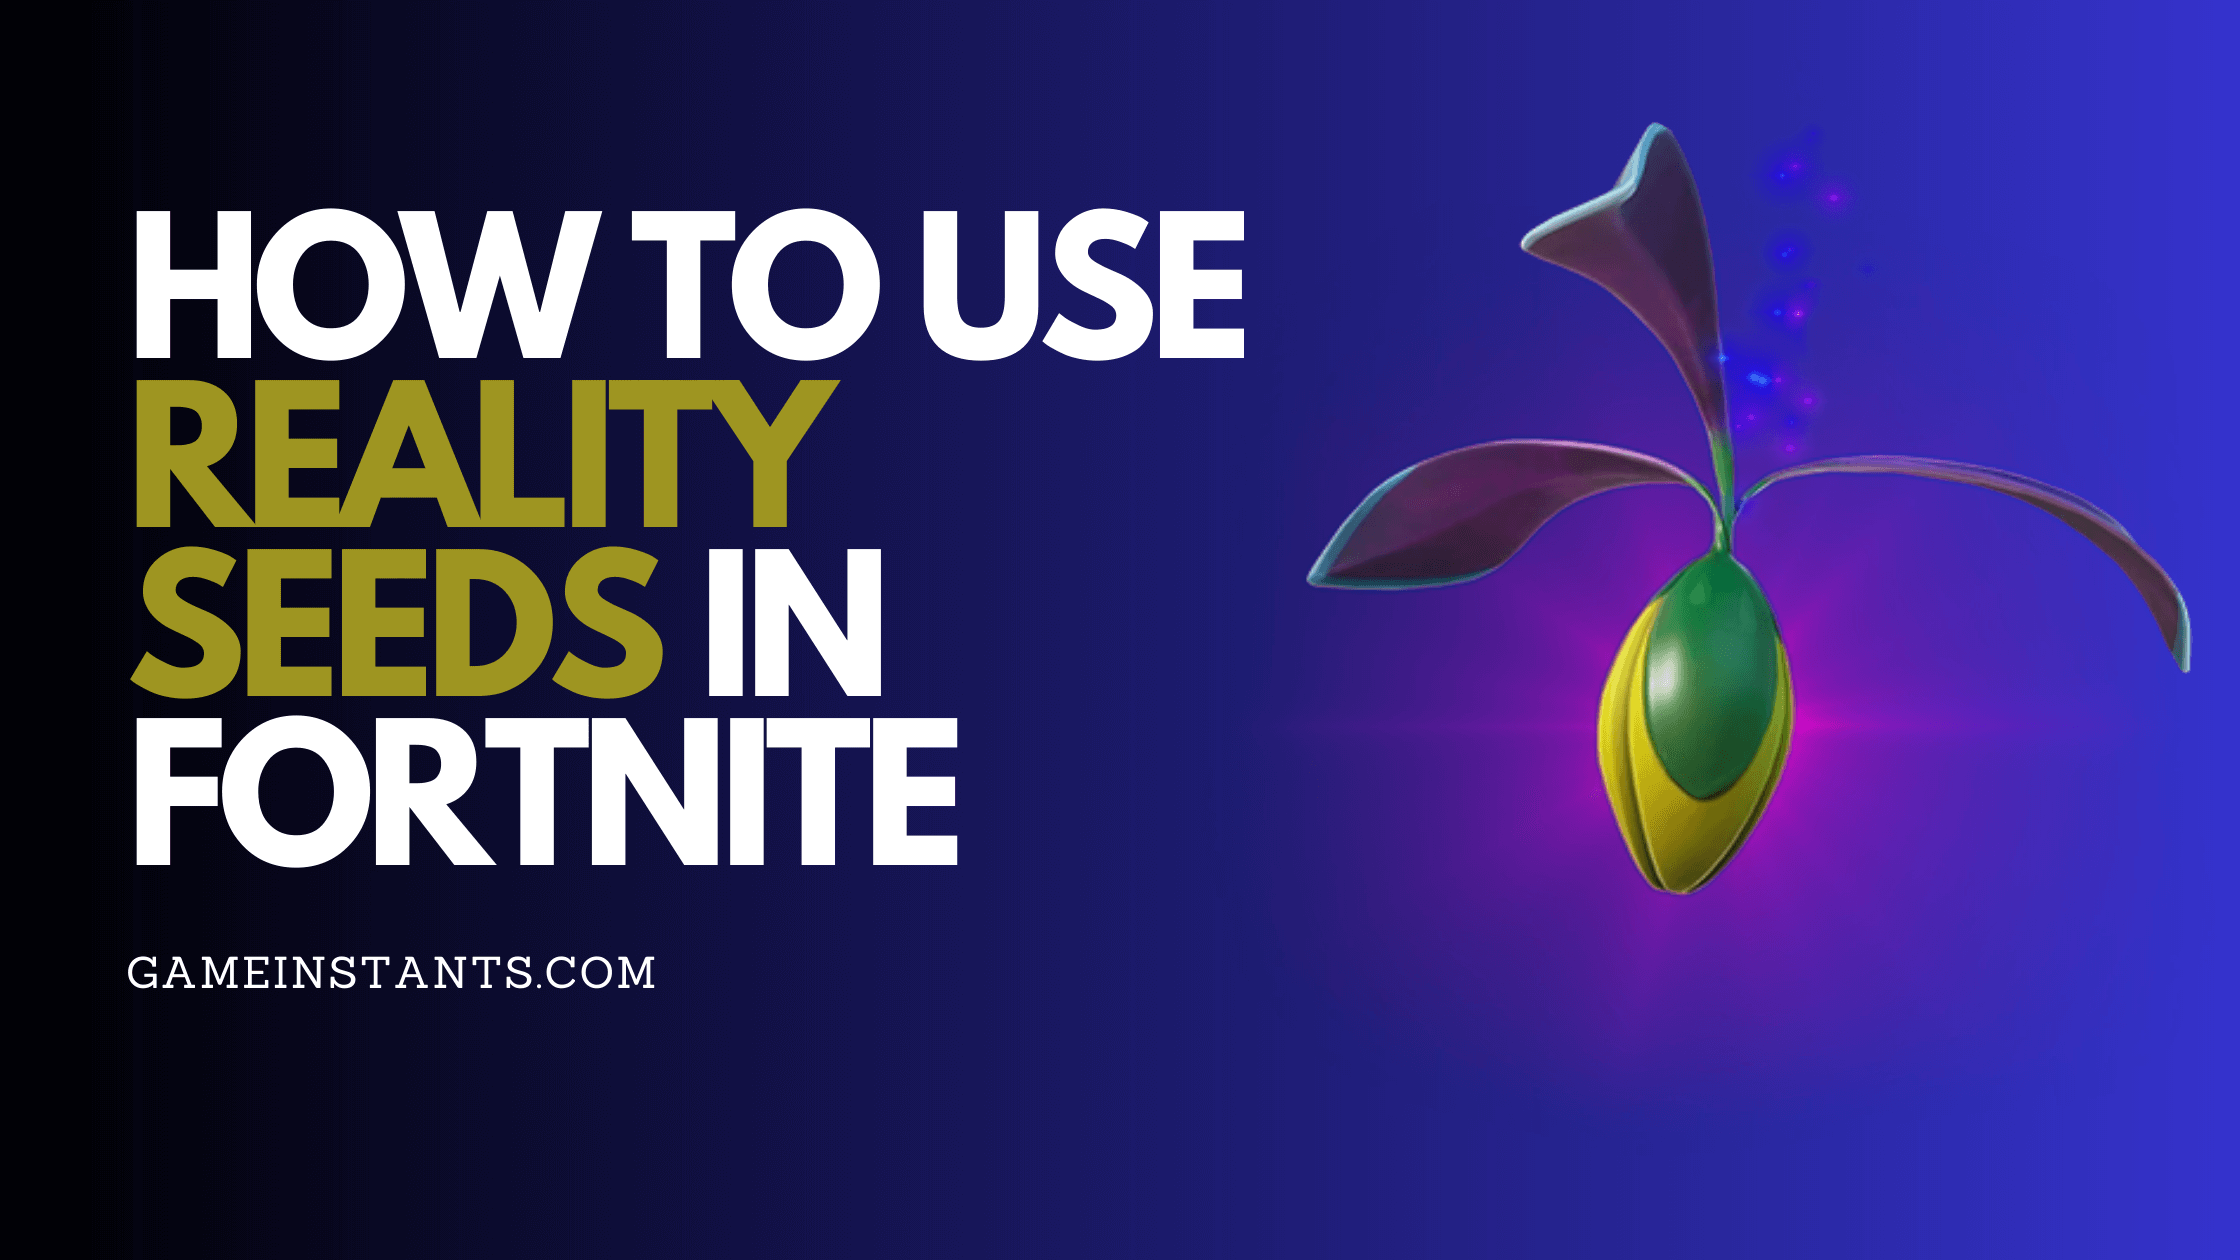 How To Use Reality Seeds in Fortnite